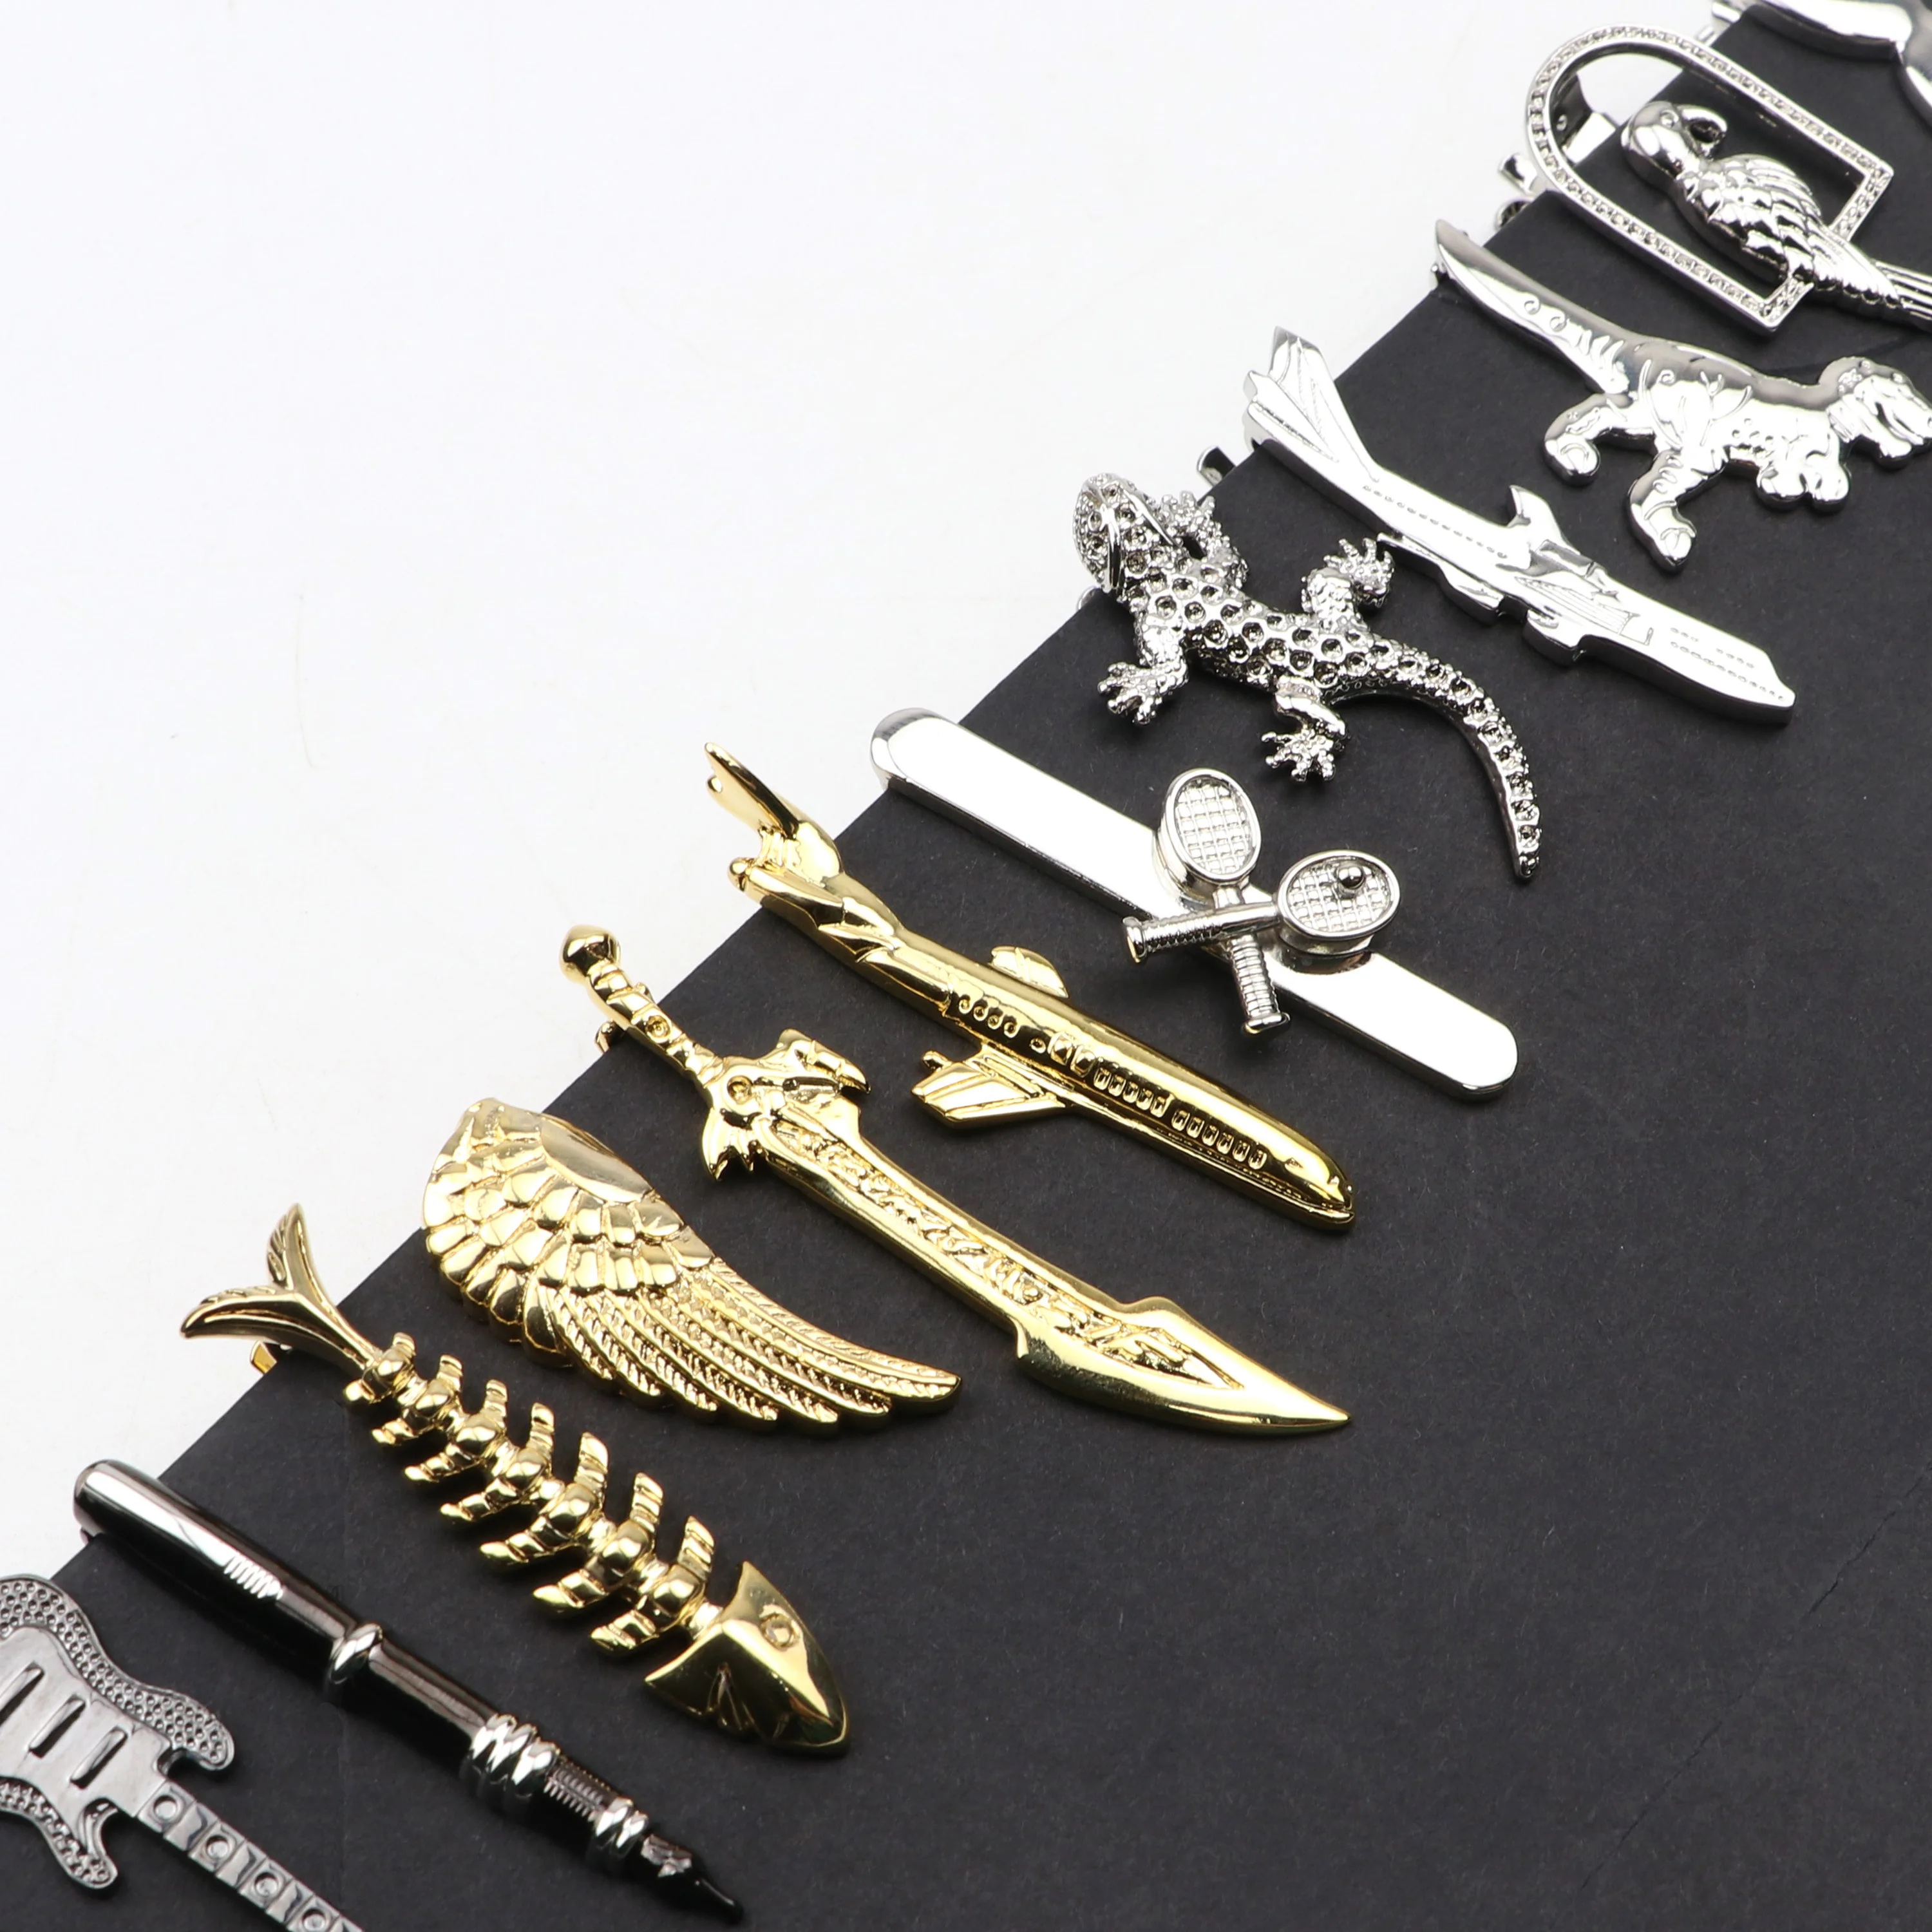 New Men's Tie Clip Bright Chrome Stainless Steel Airplane Ruler Guitar Shape Jewelry Necktie Clips Pin Clasp Clamp Wedding Gifts